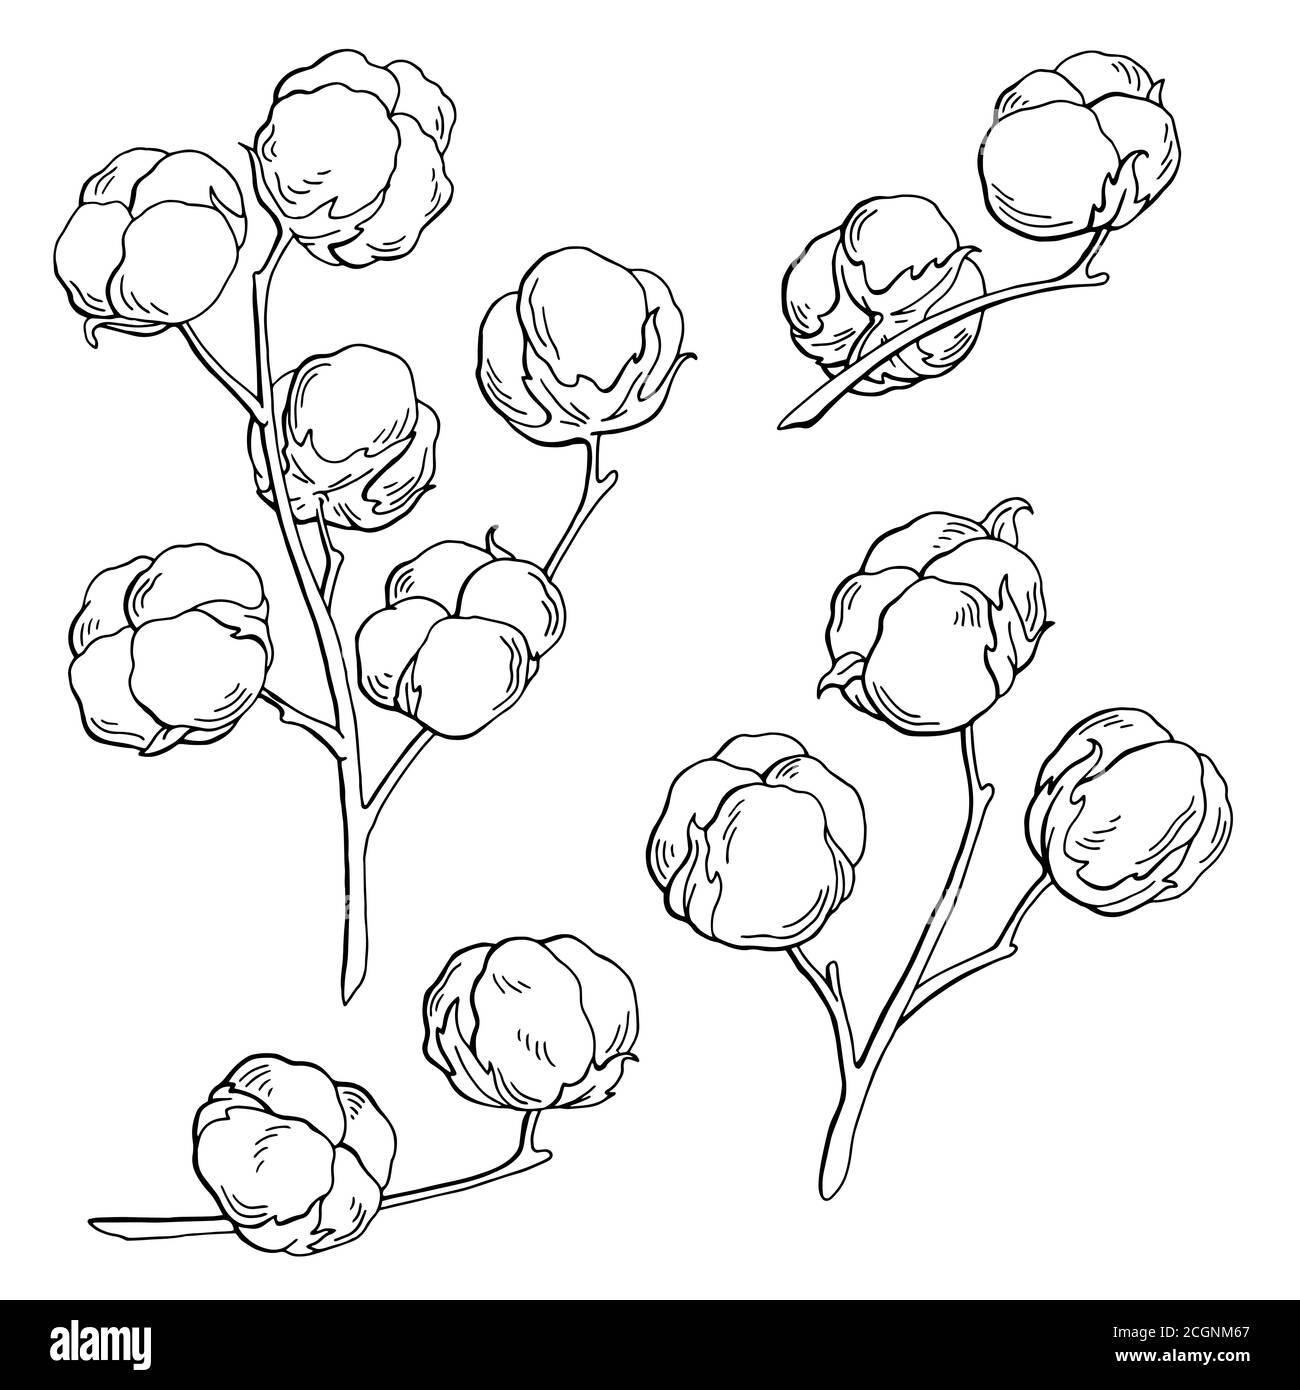 Cotton plant graphic black white isolated sketch illustration vector Stock Vector